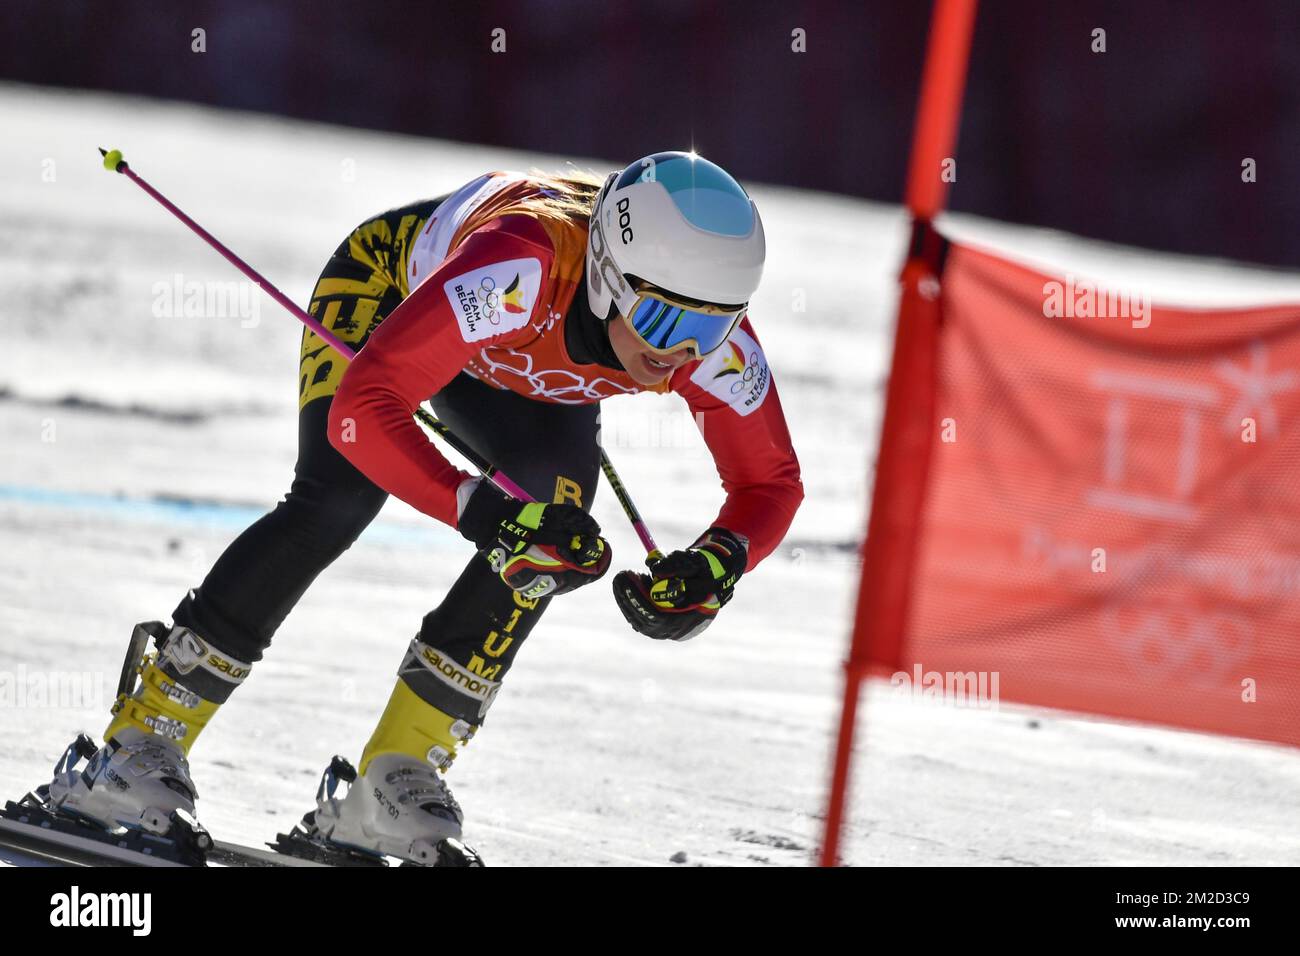 Belgian skier Kim Vanreusel pictured in action during the women's giant slalom skiing event, at the XXIII Olympic Winter Games, Thursday 15 February 2018, in Pyeongchang, South Korea. The Winter Olympics are taking place from 9 February to 25 February in Pyeongchang County, South Korea. BELGA PHOTO DIRK WAEM Stock Photo